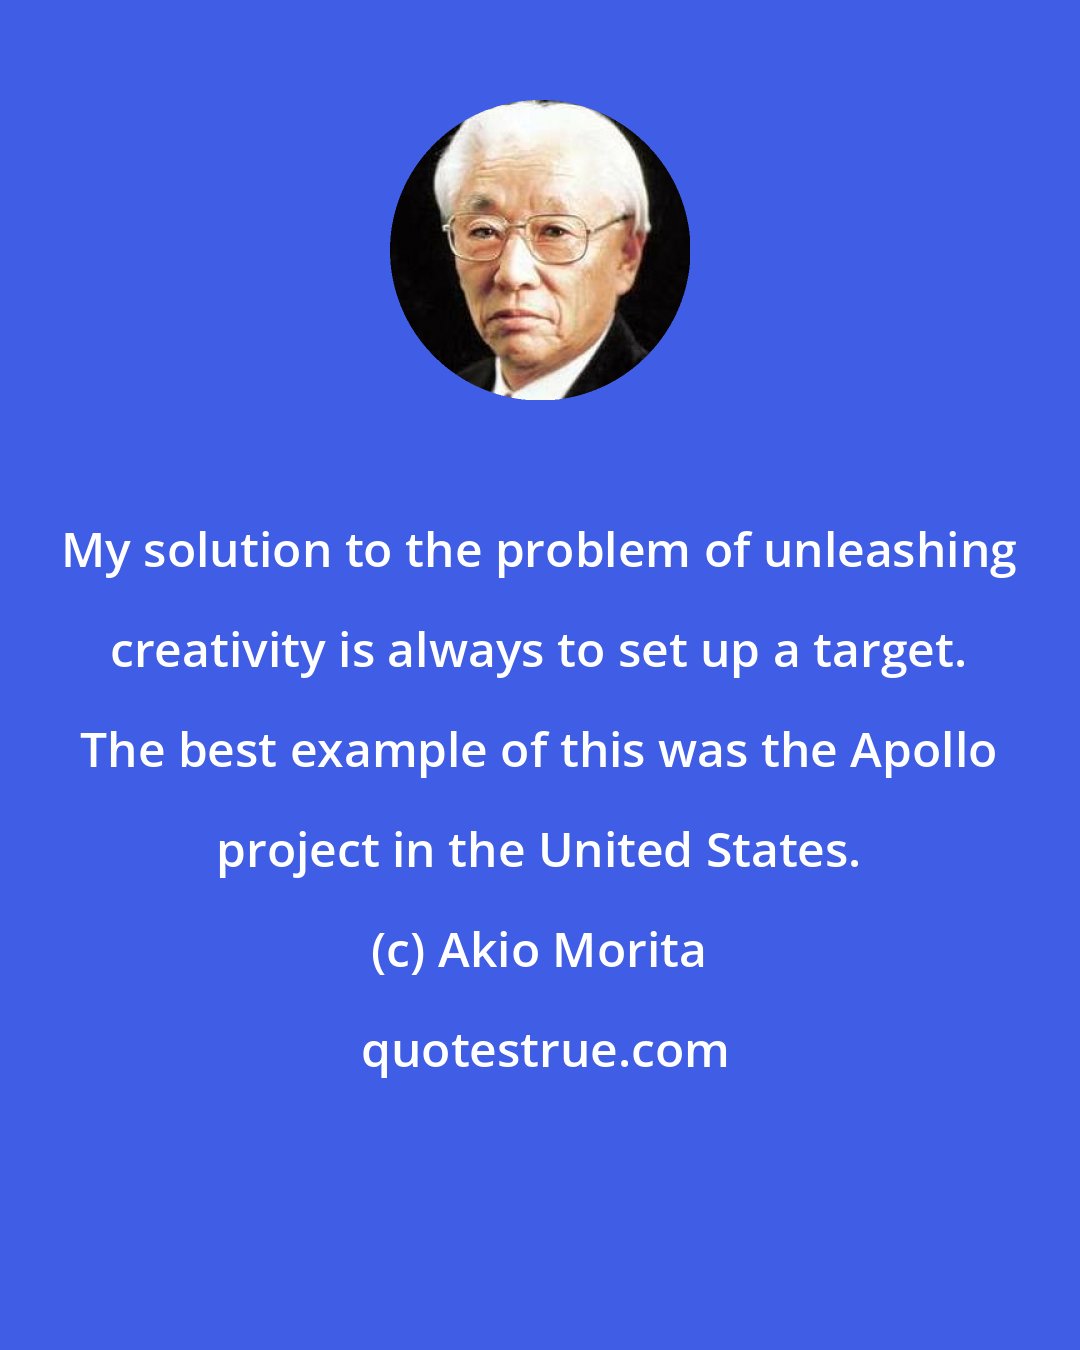 Akio Morita: My solution to the problem of unleashing creativity is always to set up a target. The best example of this was the Apollo project in the United States.